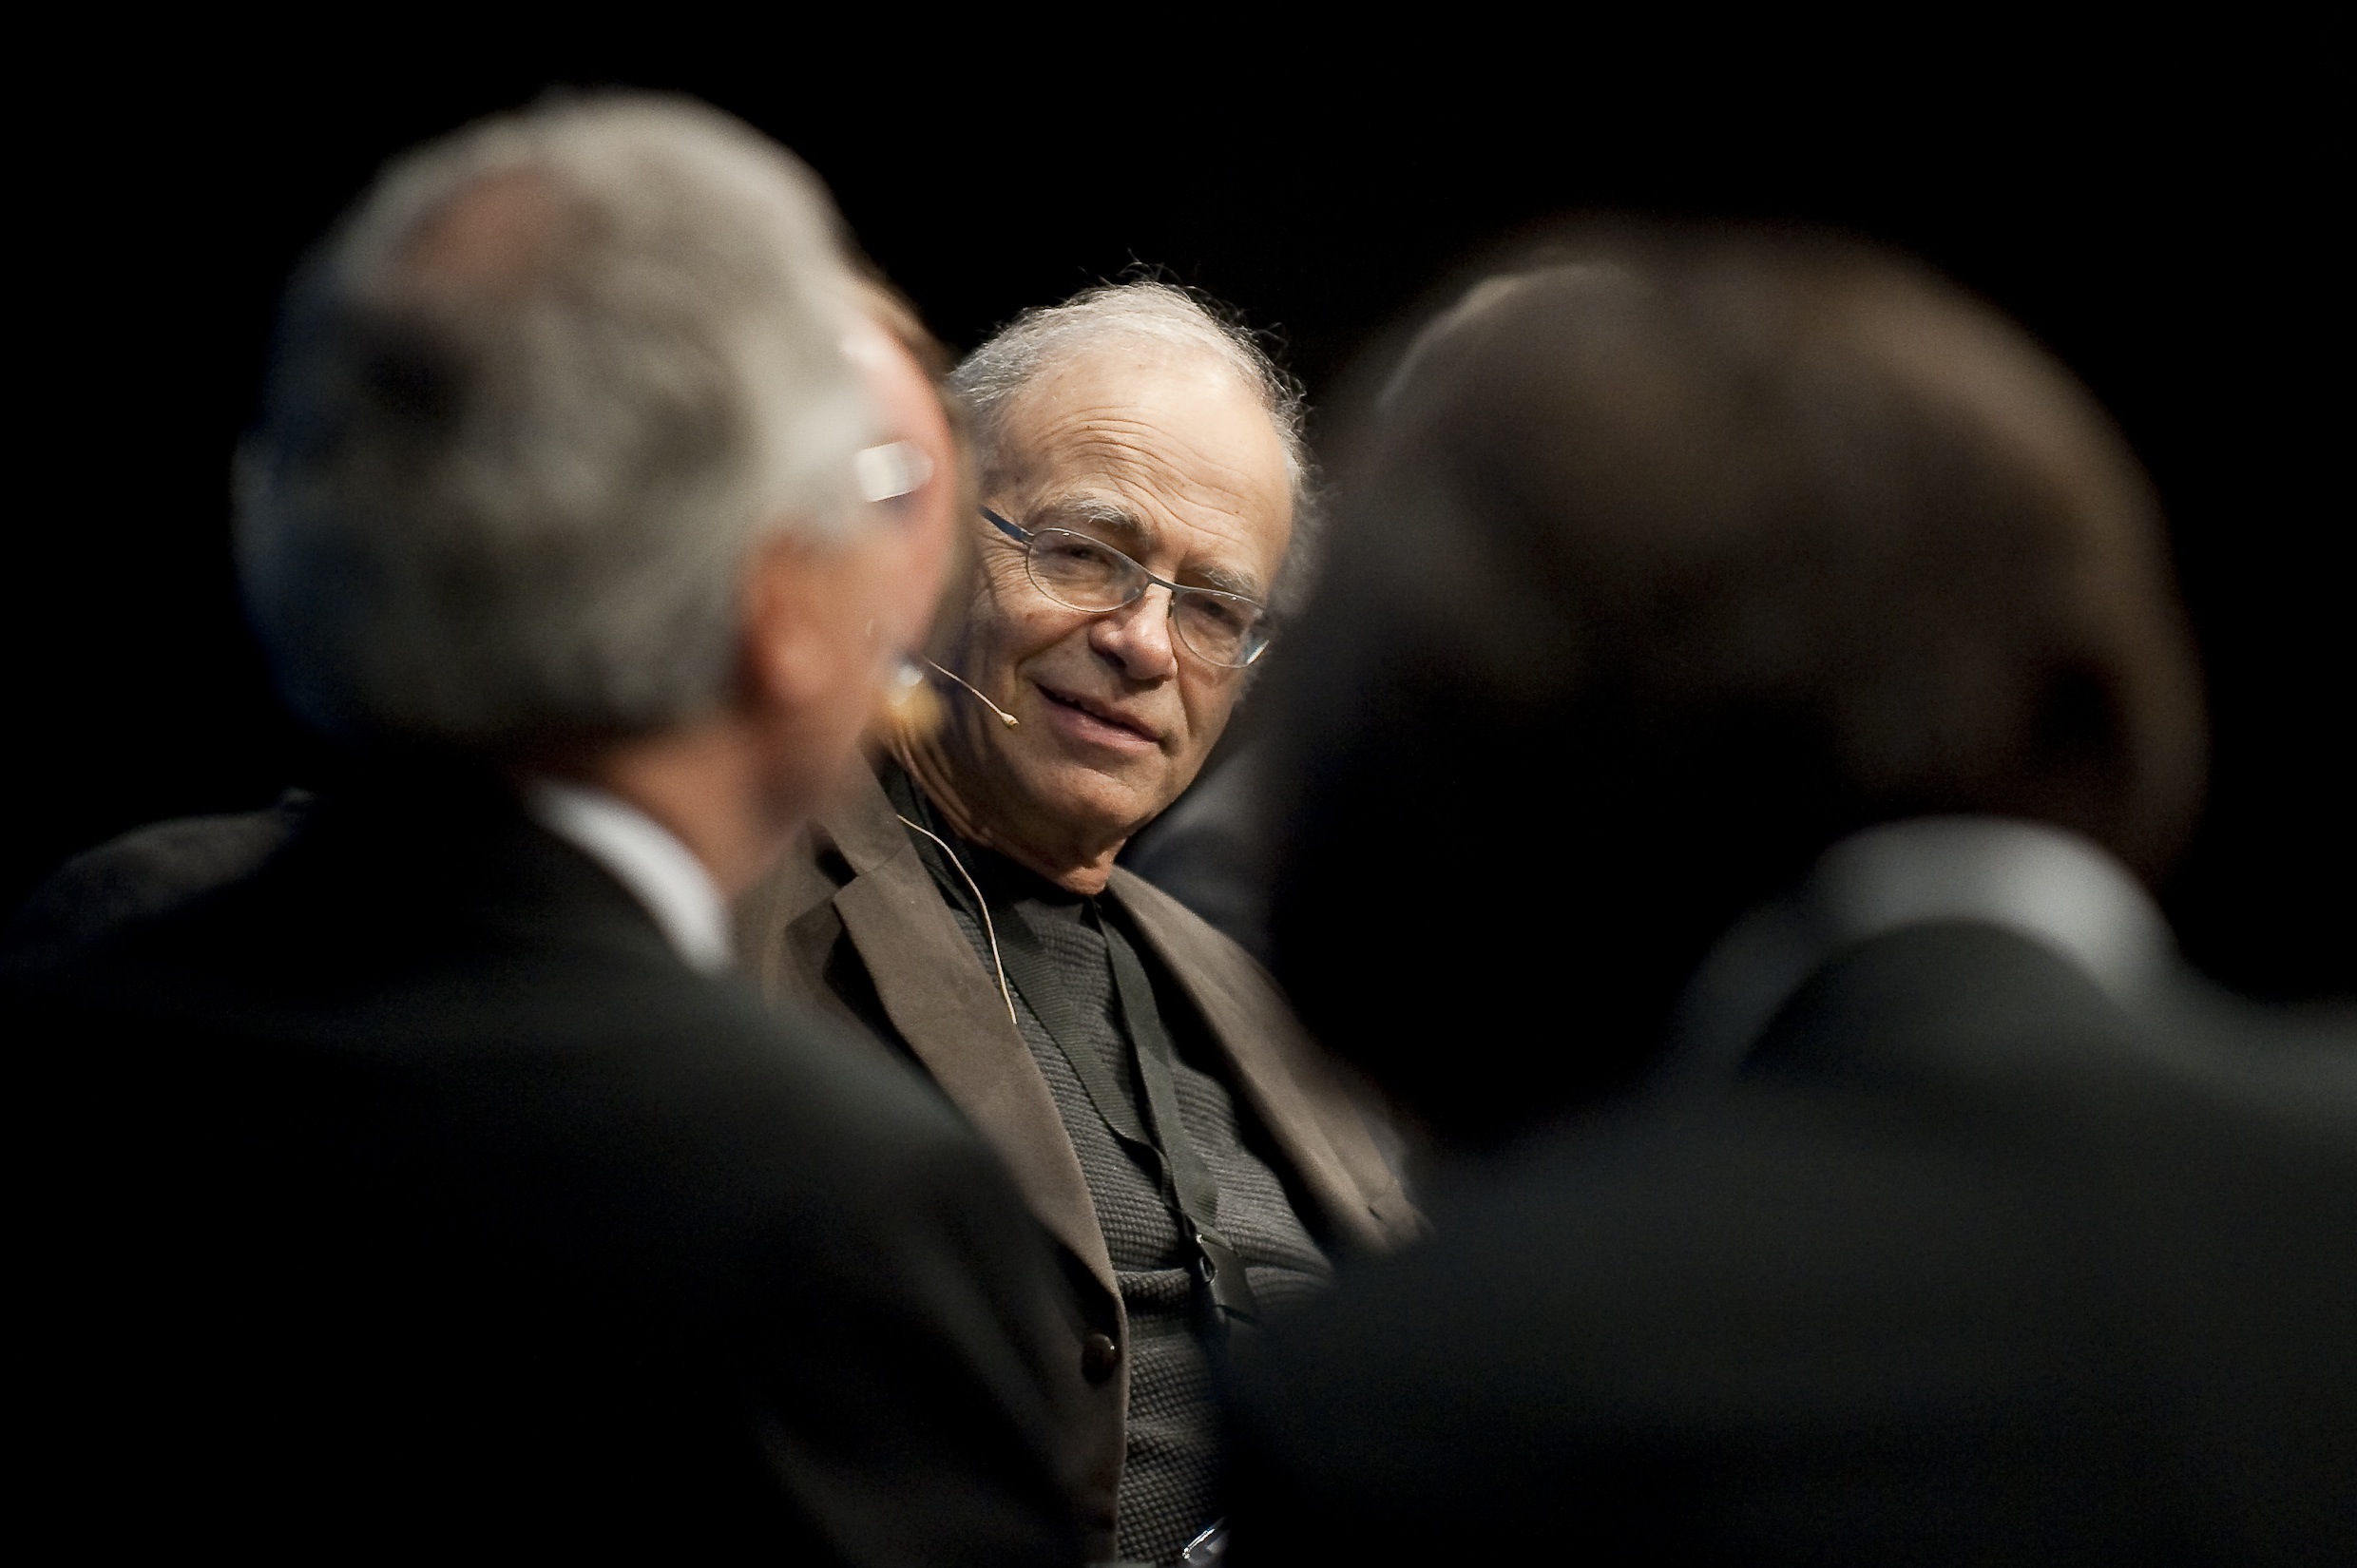 Peter Singer, wearing glasses, looks at two people with whom he is speaking.